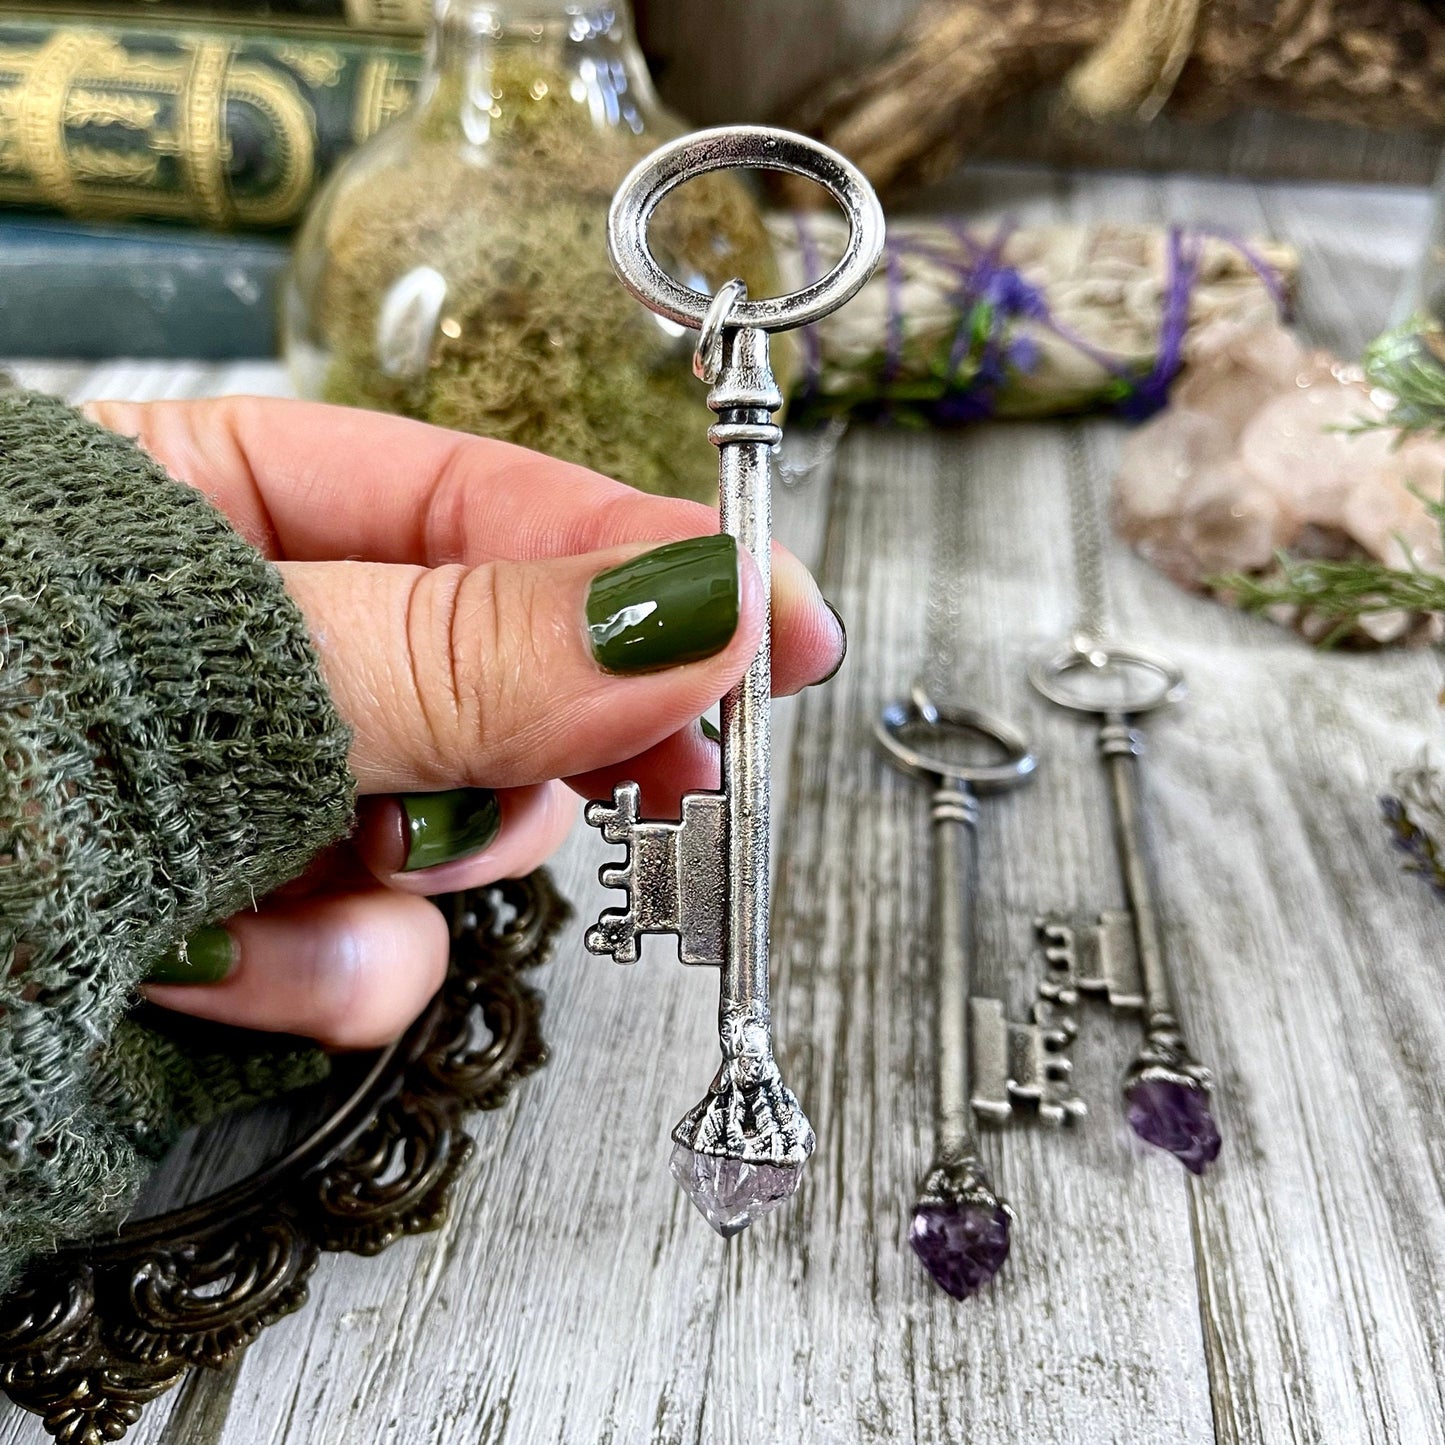 Raw Amethyst Crystal Vintage Skeleton Key Necklace Pendant in Fine Silver / Foxlark Collection - One of a Kind